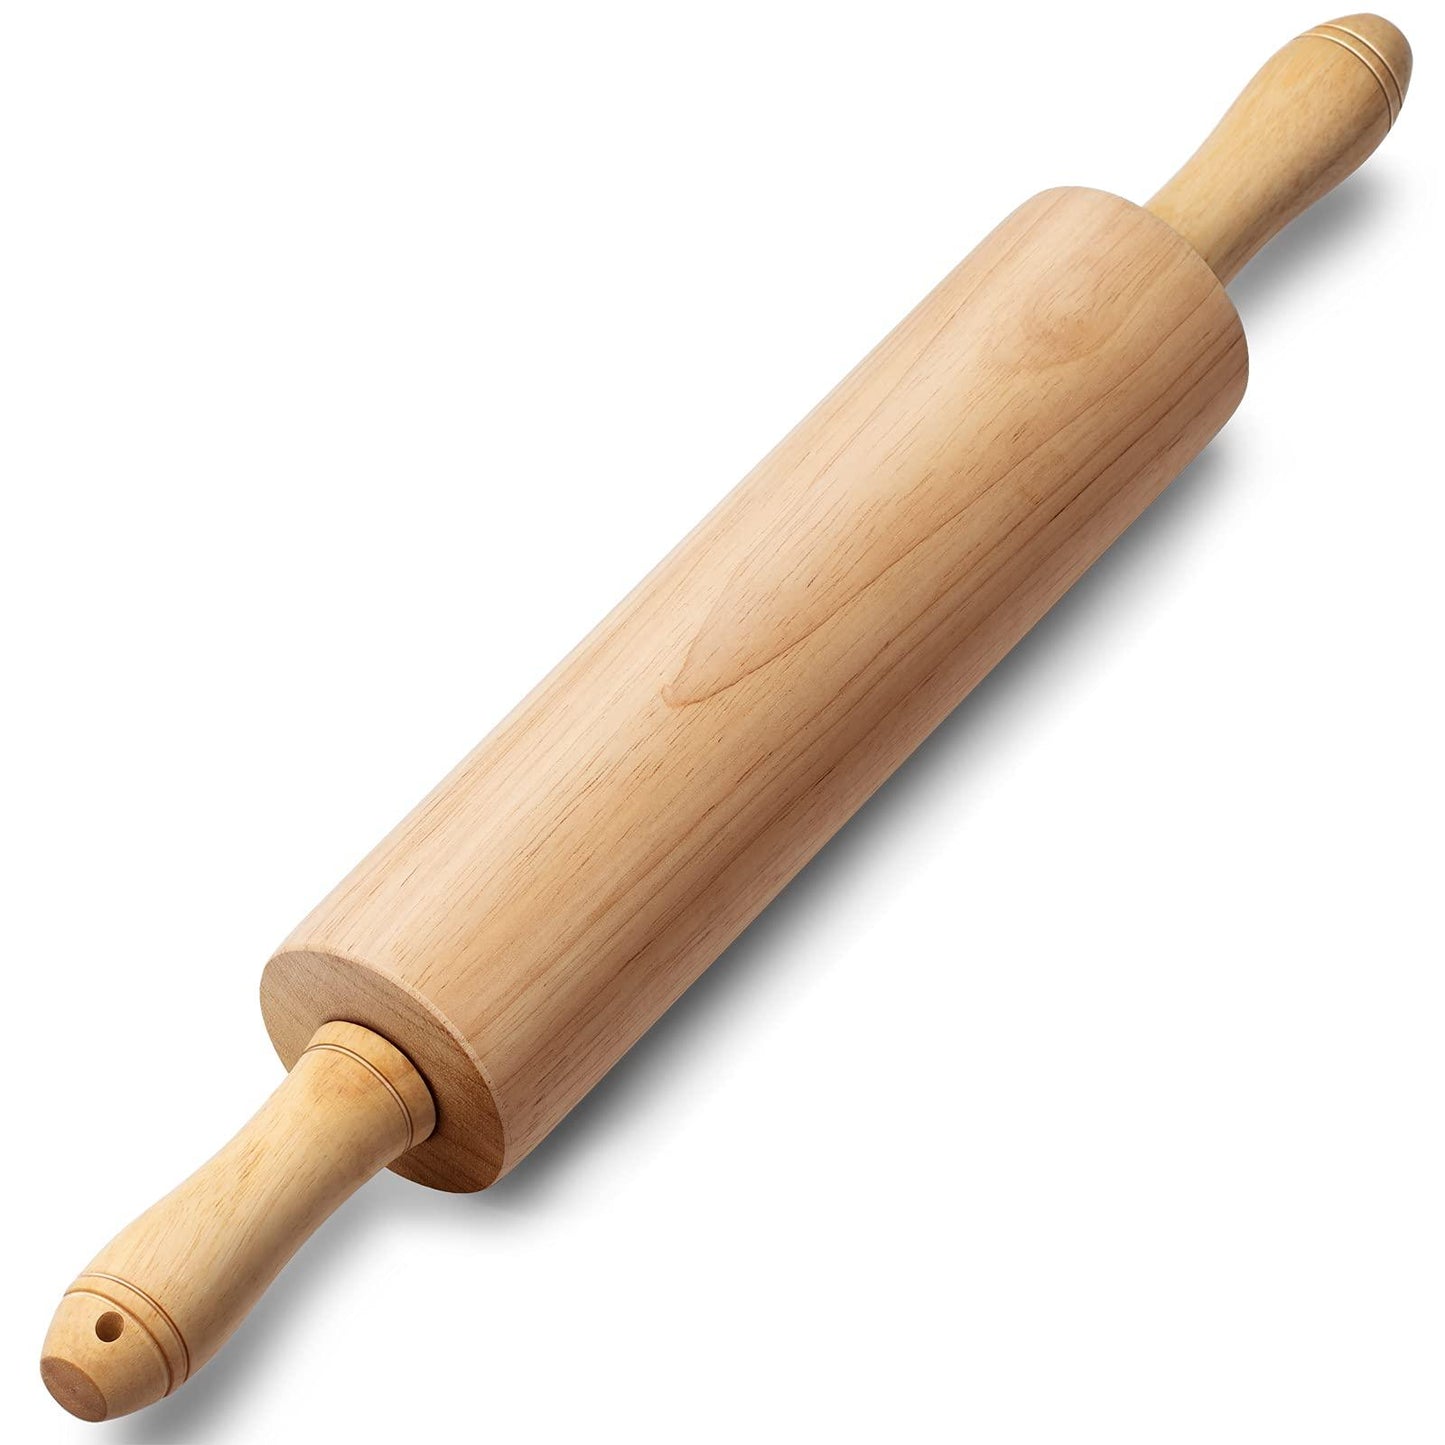 PARMEDU Classic Wooden Rolling Pin 17.5 Inch, Rotating Centre Dough Roller with Handles for All Baking Needs, Model BK004 - CookCave